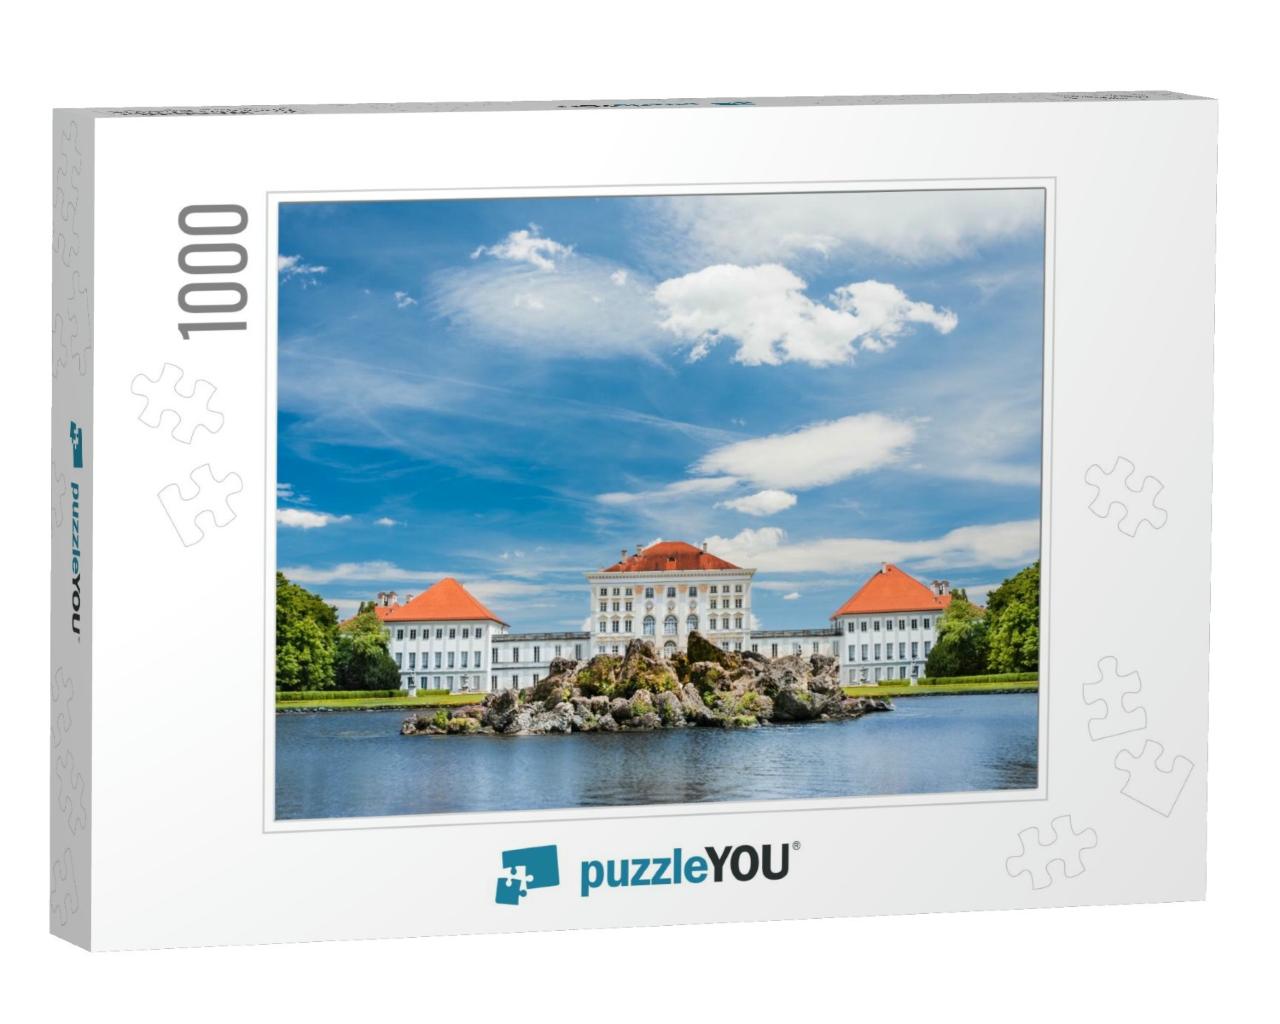 Nymphenburg Castle Grounds in Munich, Germany... Jigsaw Puzzle with 1000 pieces